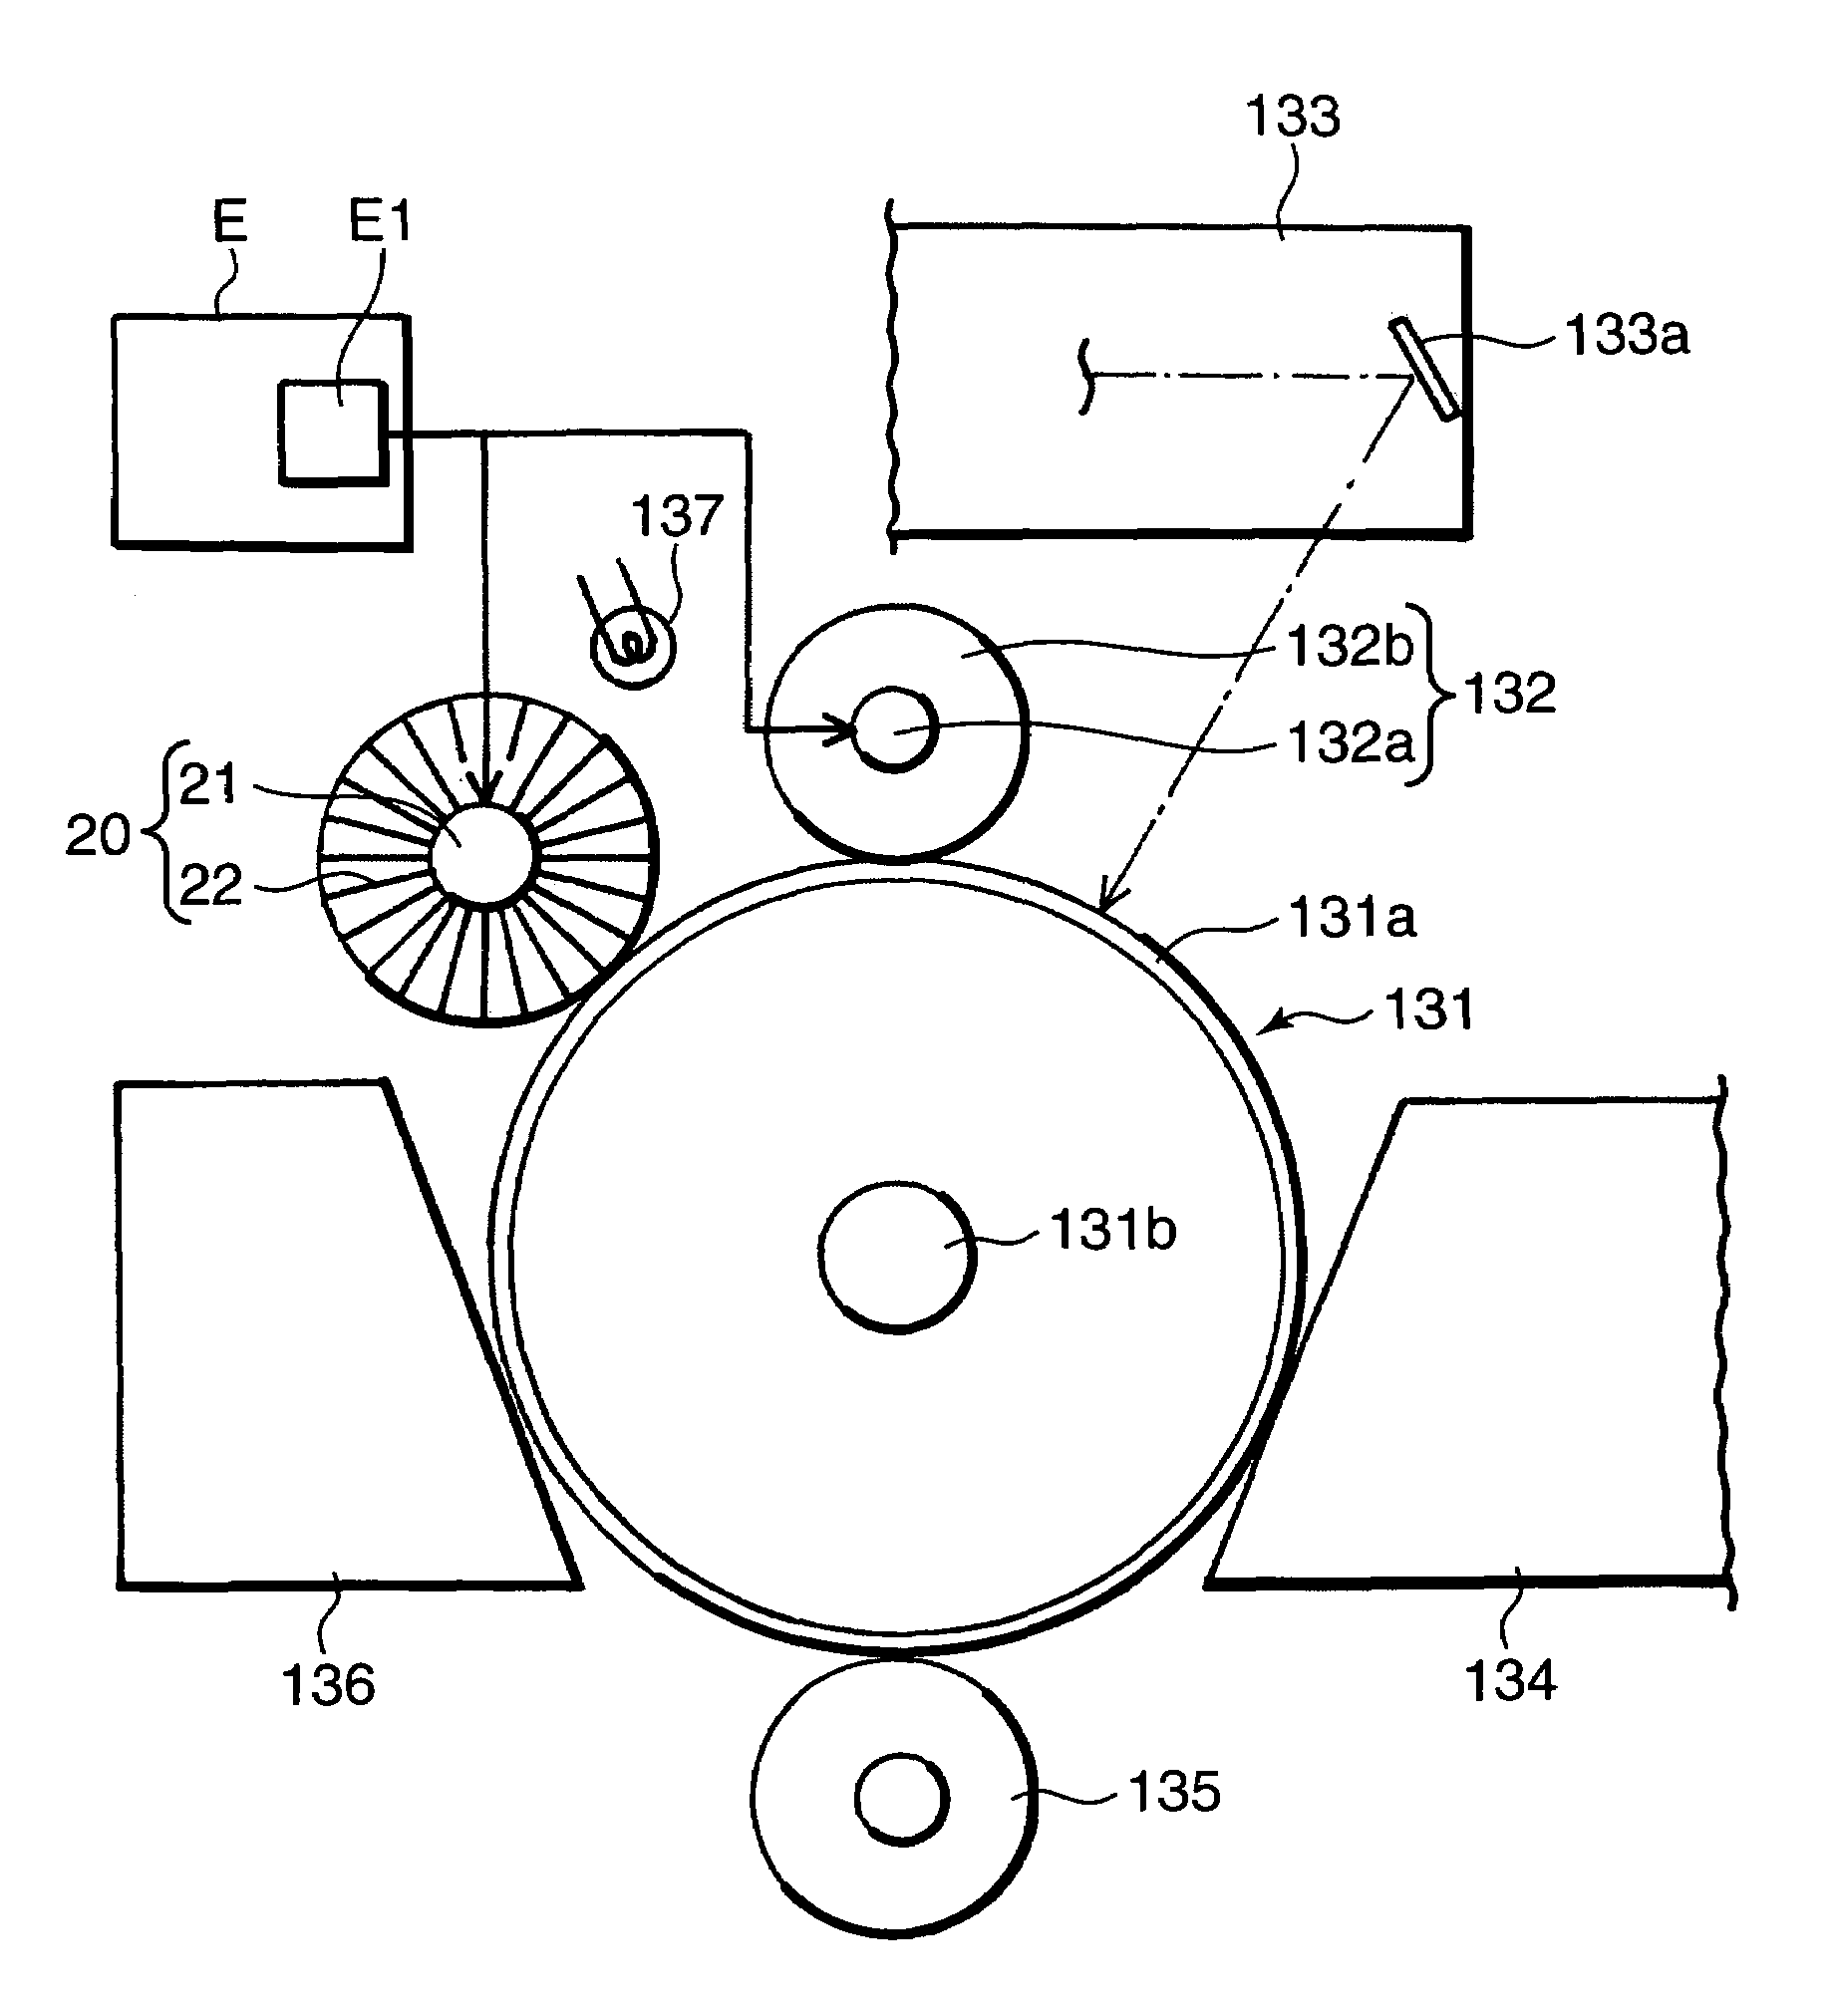 Image forming apparatus with cleaning device for removing remaining toner from outer surface of photosensitive member